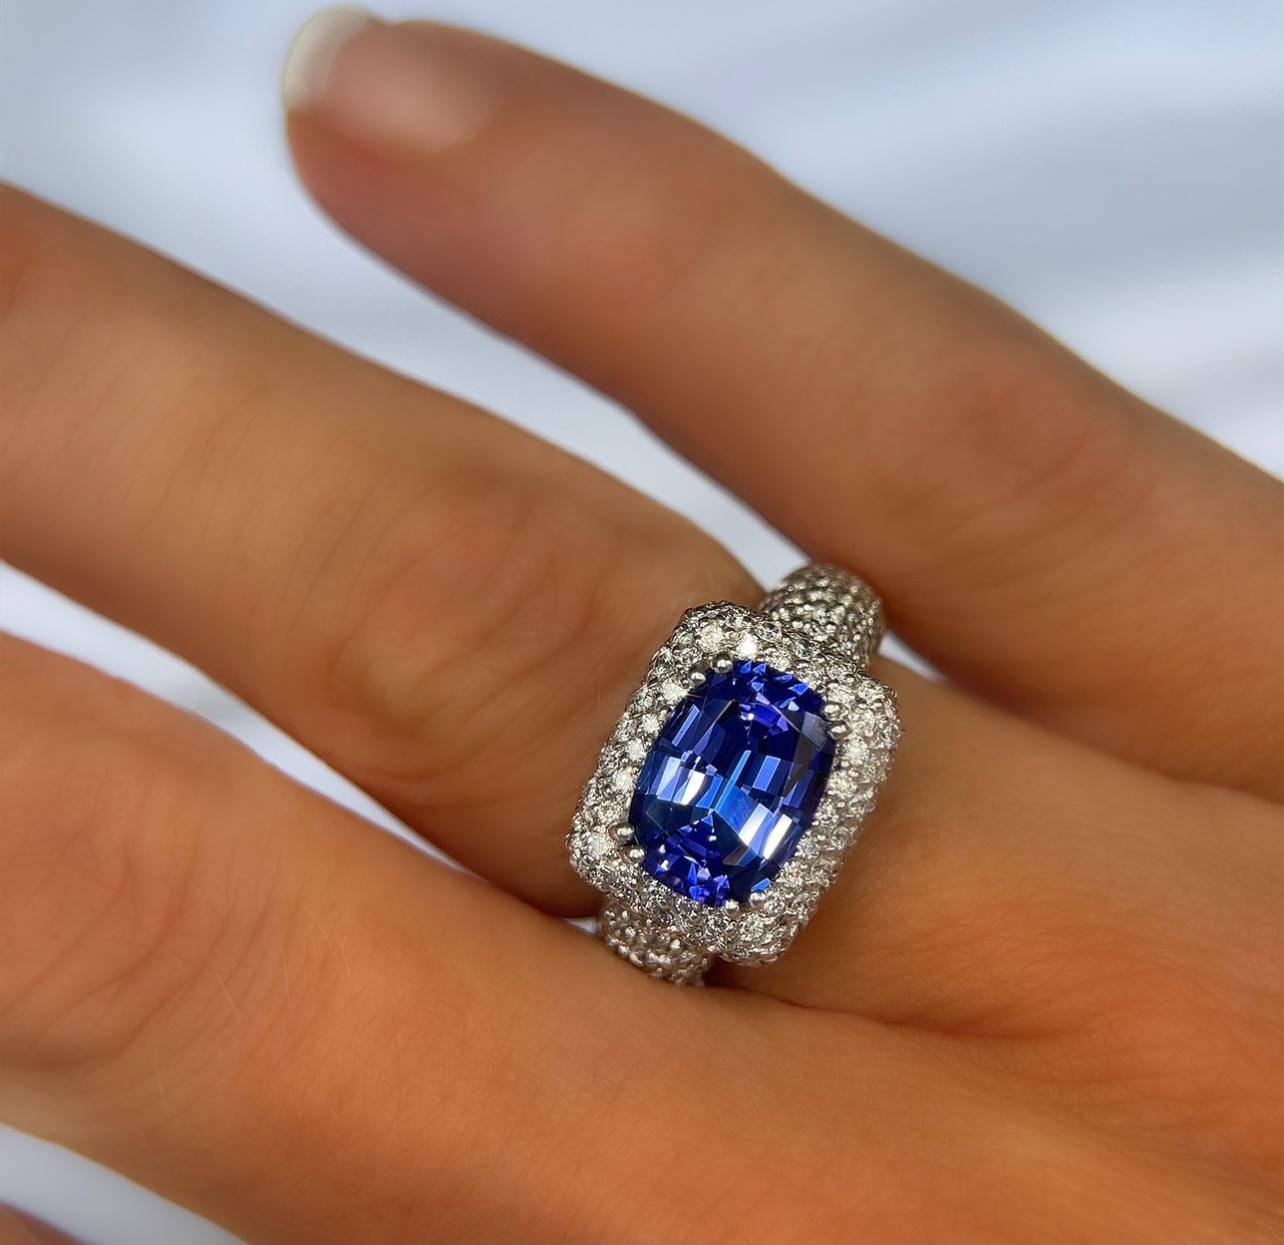 Spectacular vivid color! This 2.45 carat cushion cut tanzanite is absolutely stunning. The 1.18 cttw F color, VVS clarity diamonds highlight the beautiful tanzanite. This is set in 18Kt white gold weighing 9.30 grams.  This ring is signed SGJ and